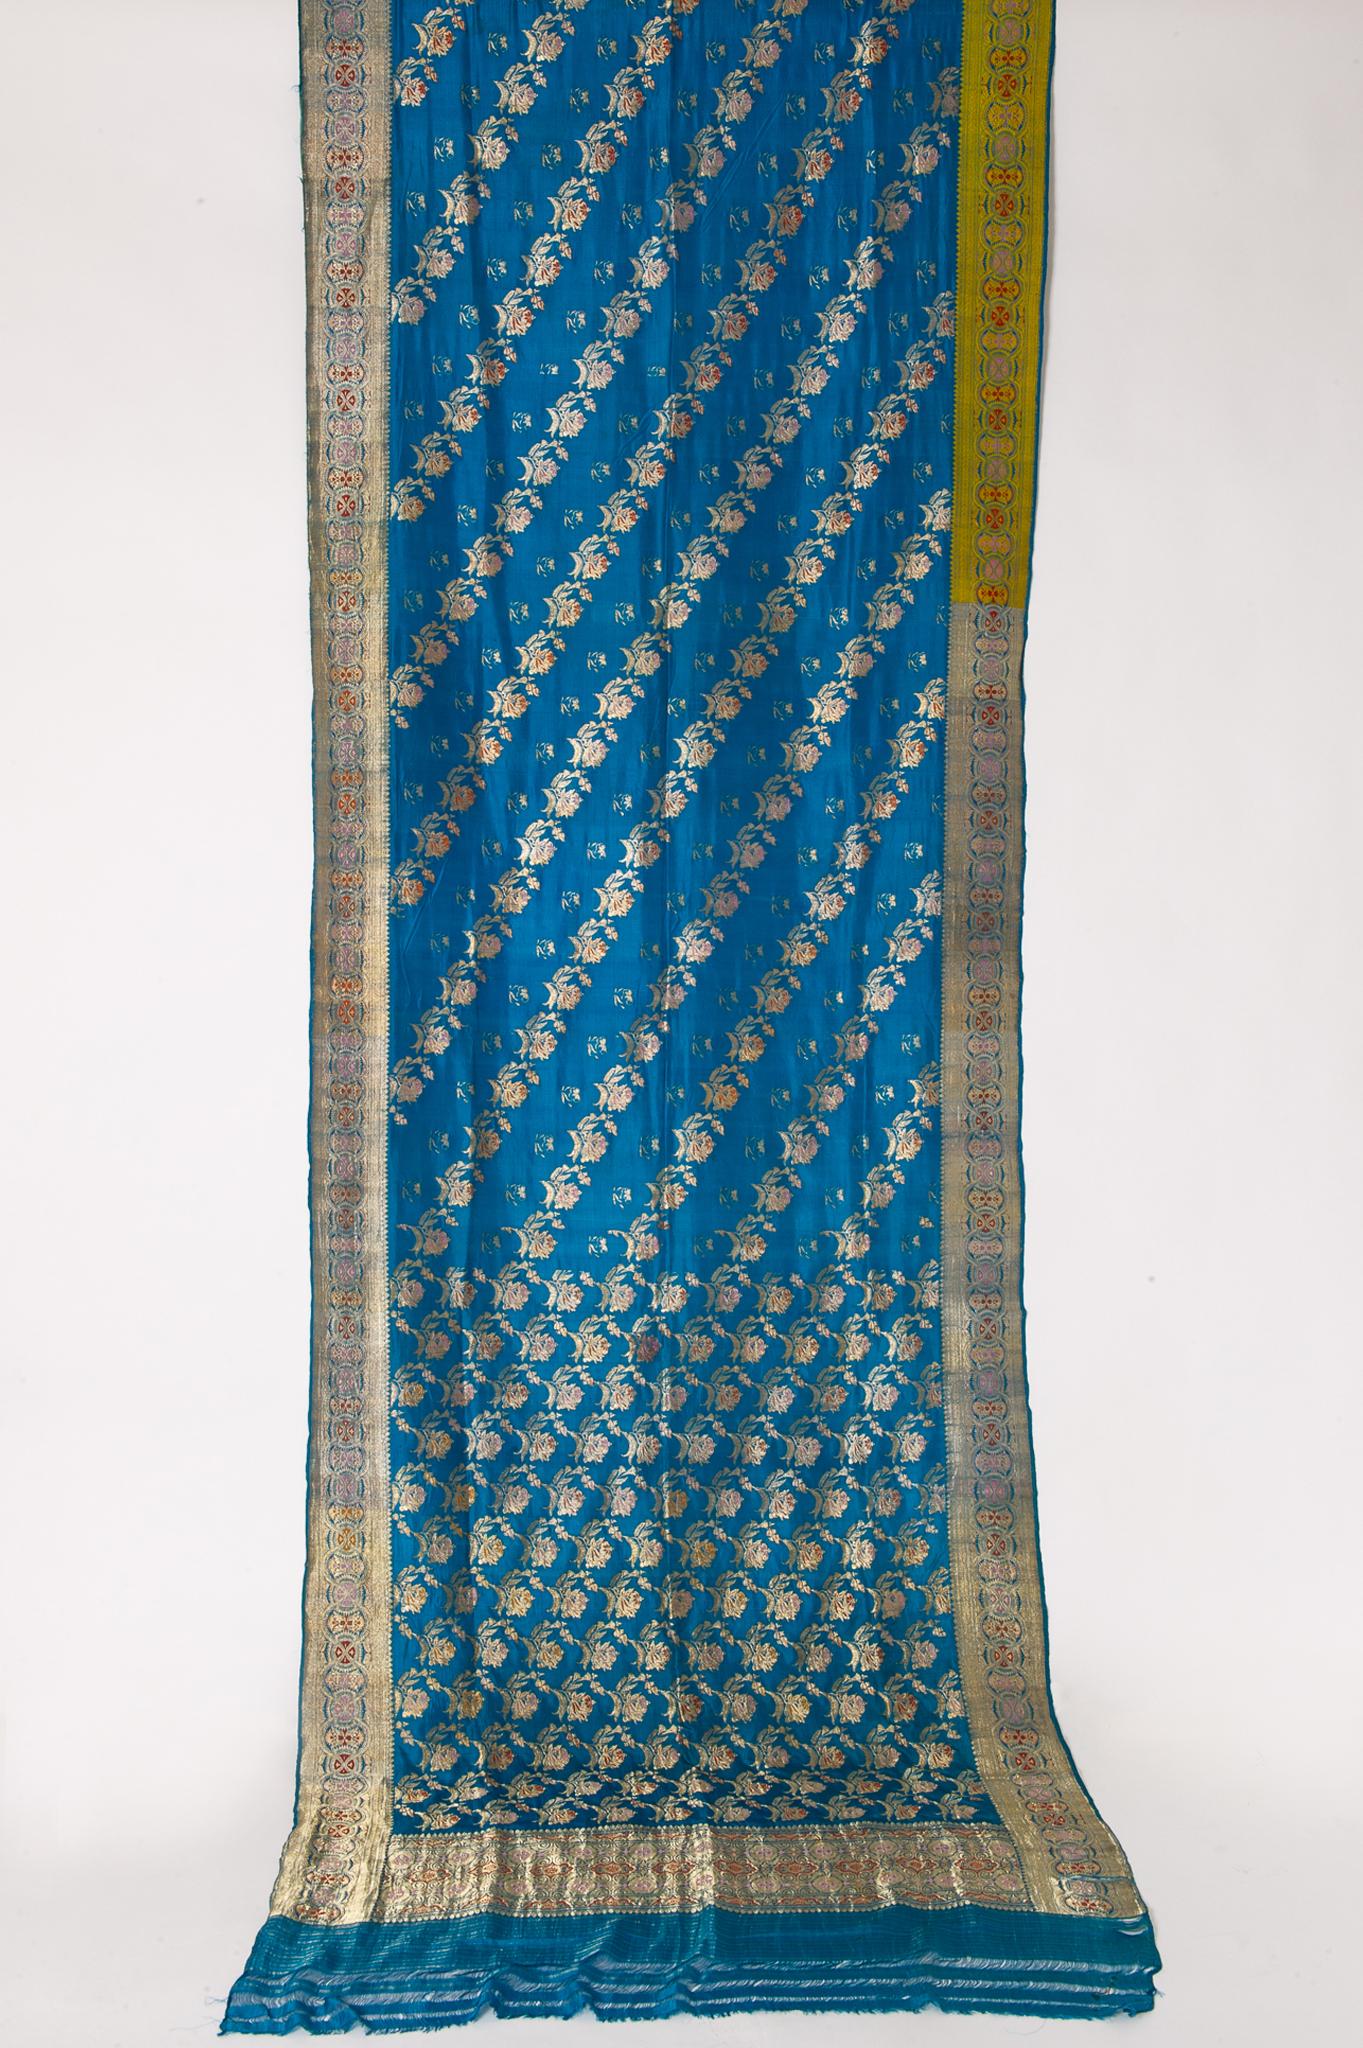 Vintage wonderful turquoise Sari, with a rich floral design: new idea for unusual curtains or an EVENING DRESS !
It has been worn, but washed. May be still spots. The tissue may be silk, but I think a little synthetic, so I tell 